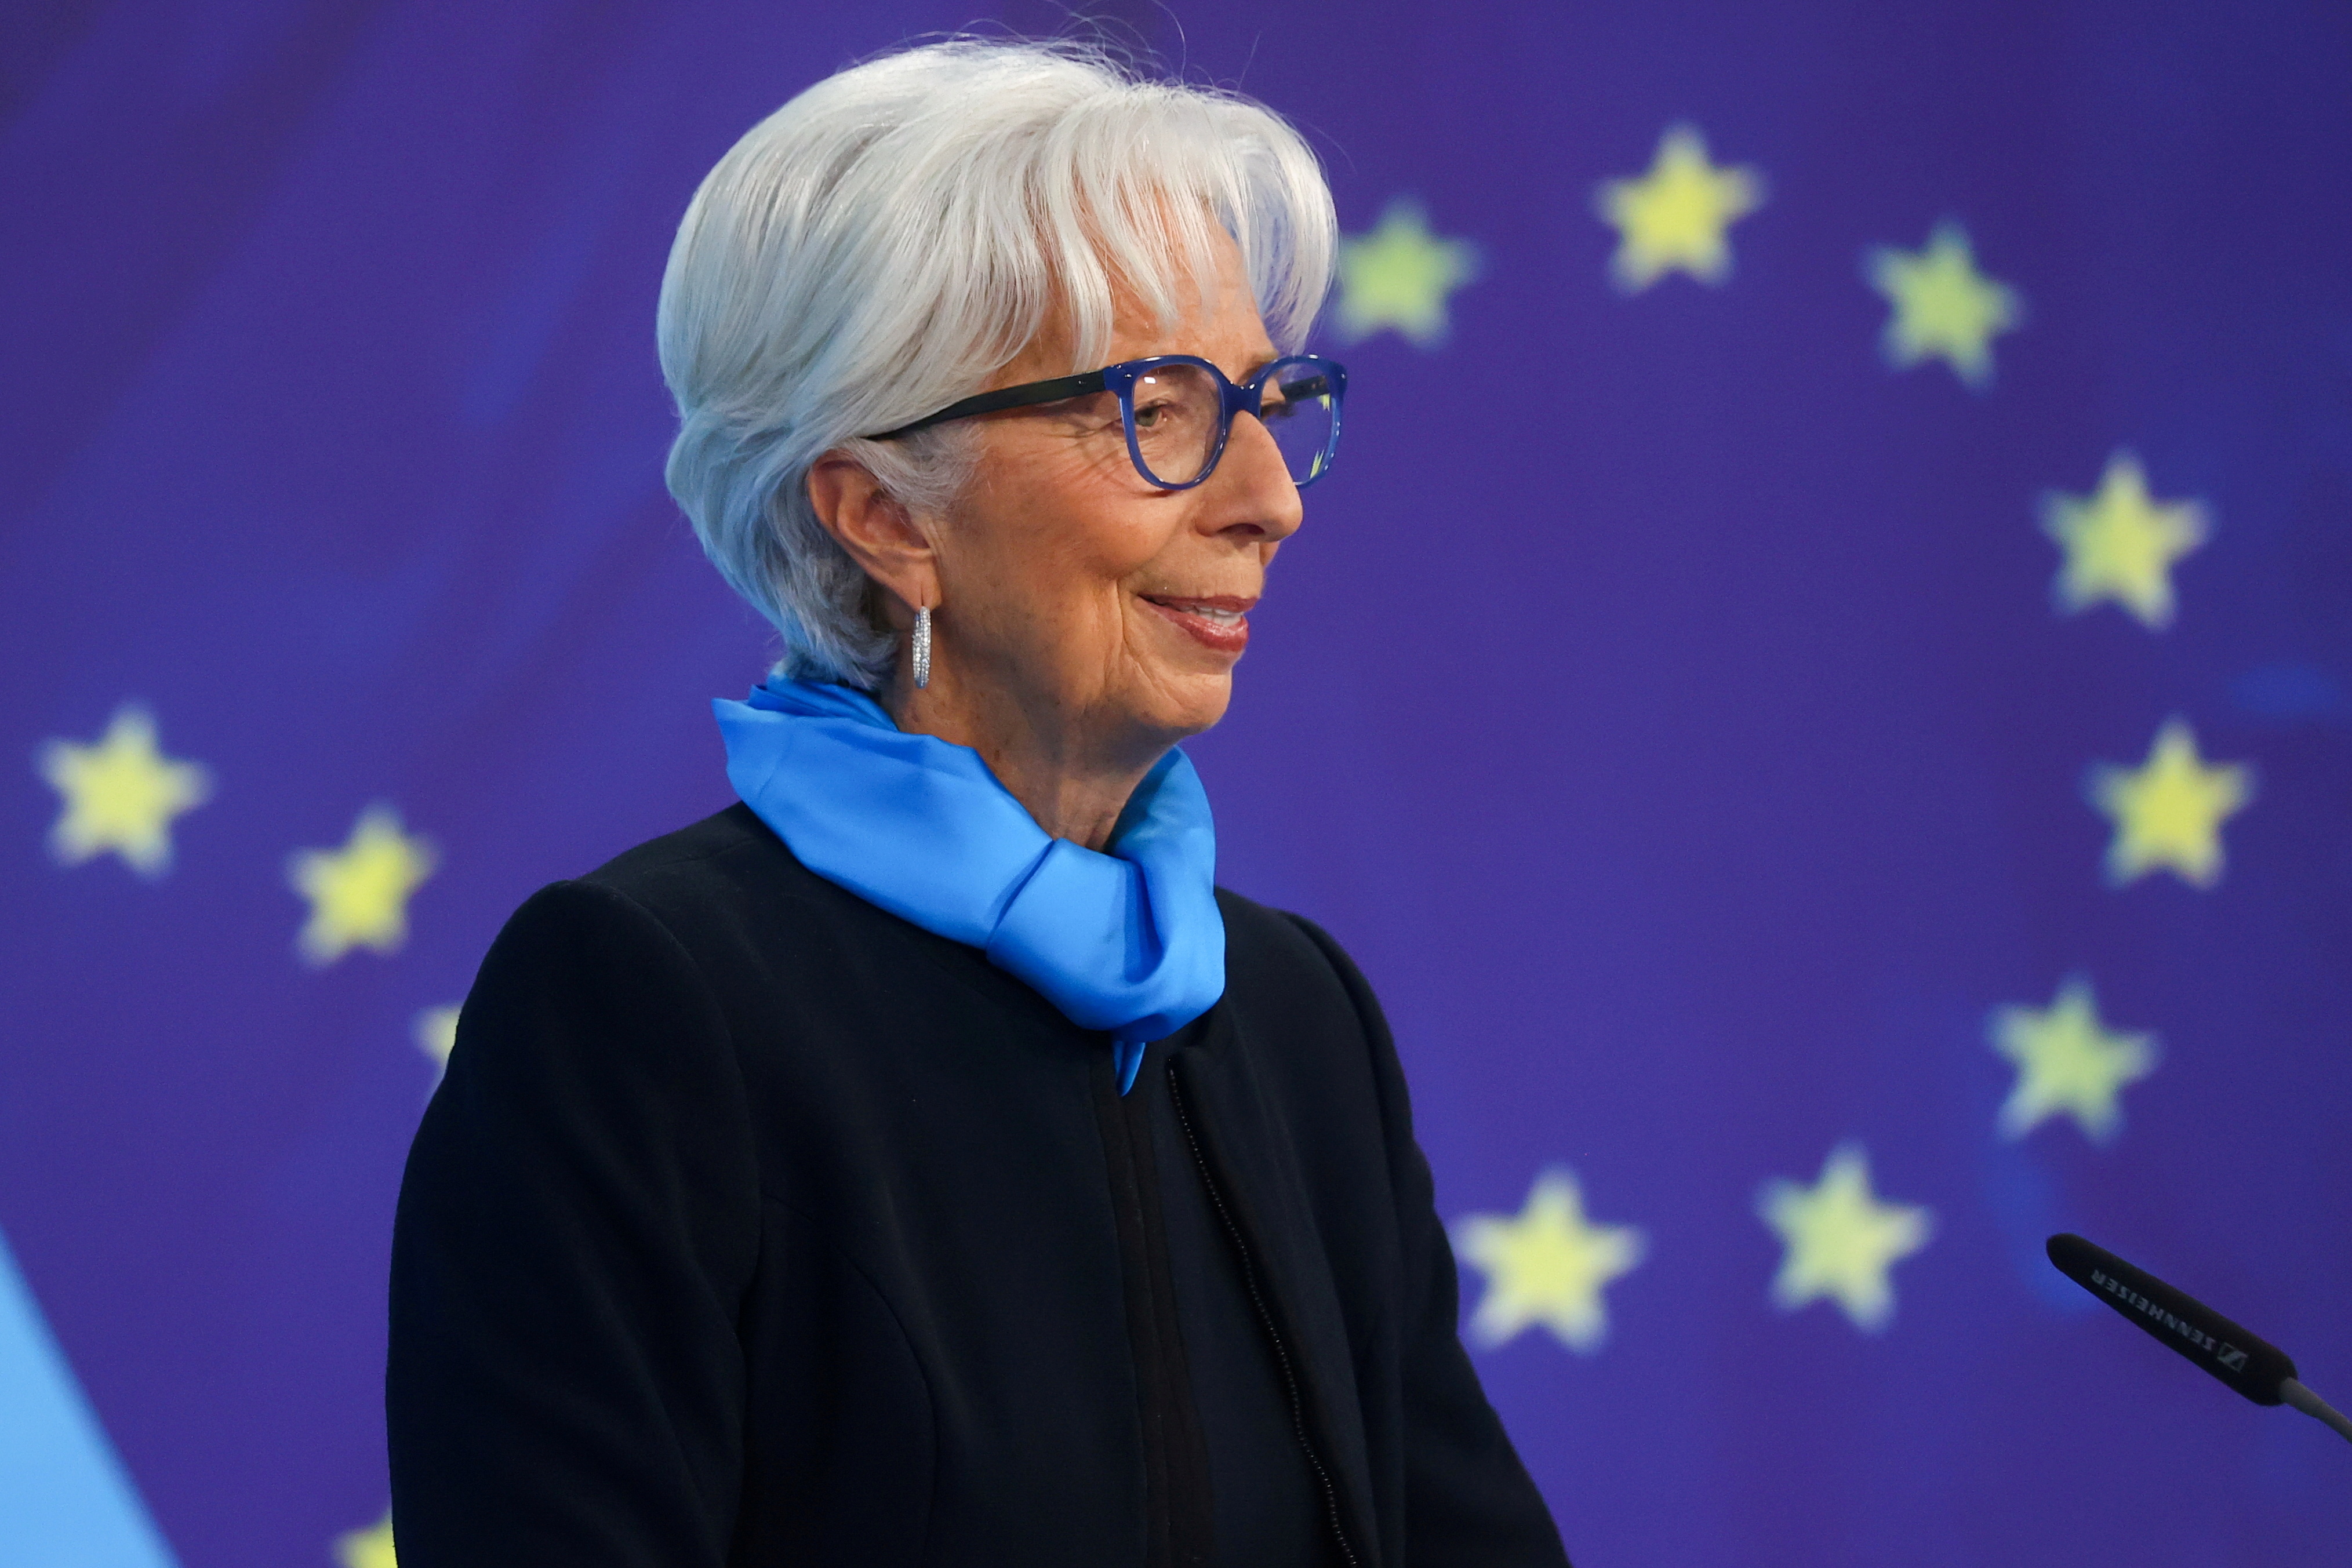 President of the European Central Bank (ECB) Christine Lagarde speaks as she takes part in a news conference on the outcome of the Governing Council meeting, in Frankfurt, Germany, October 28, 2021. REUTERS/Kai Pfaffenbach